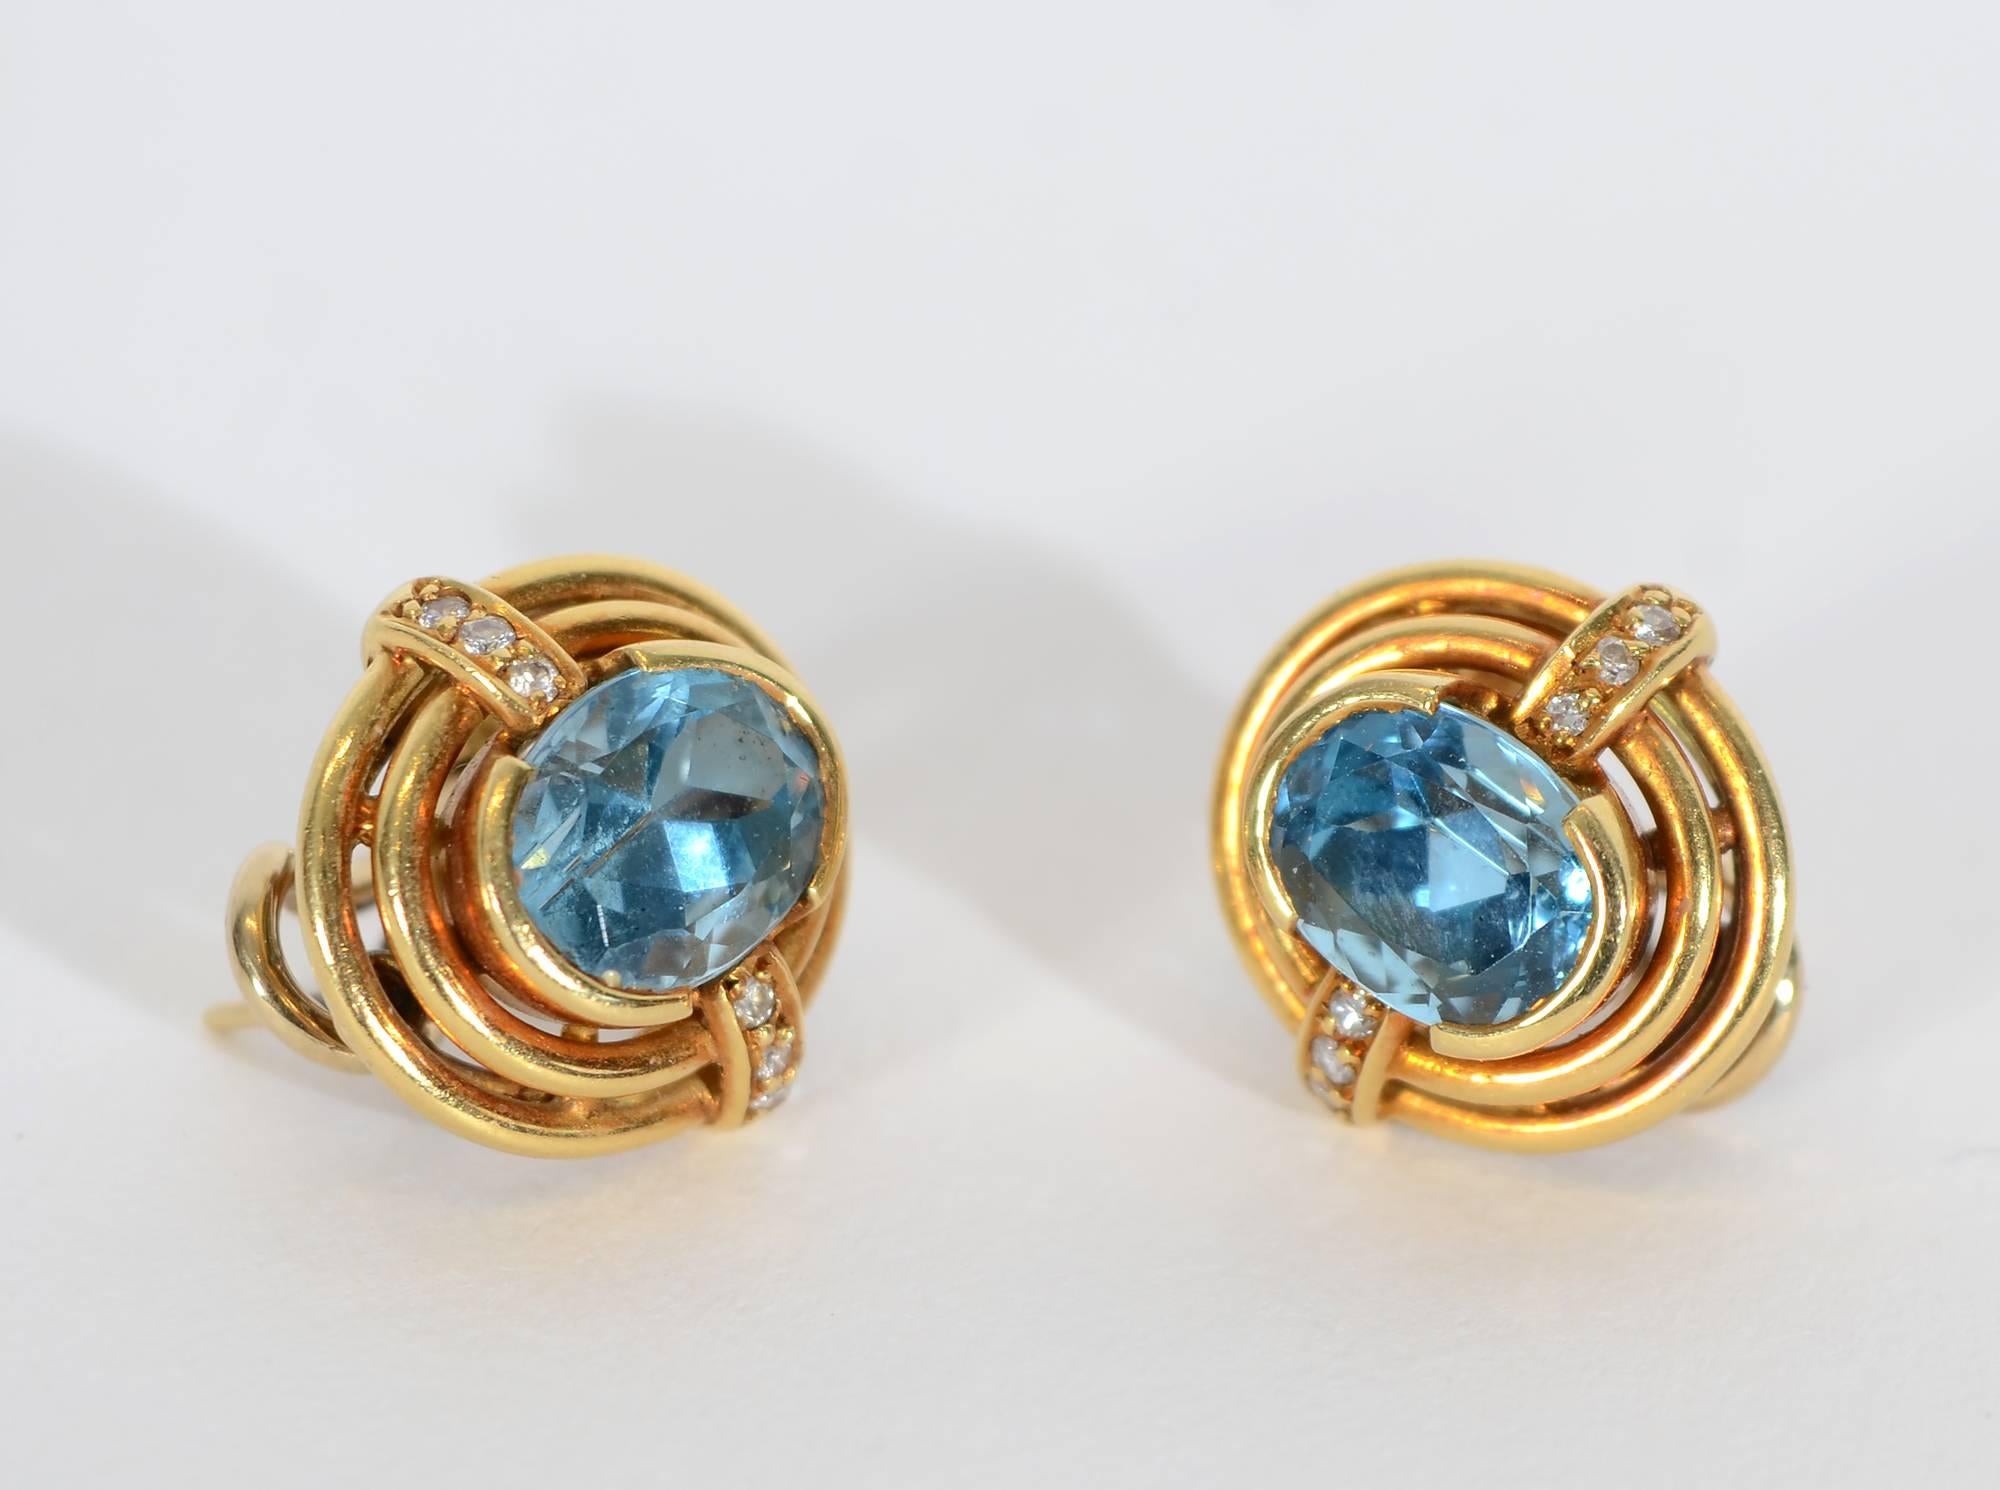 H. Stern earrings that are tailored yet have a hint of bling. The center stone is blue topaz surrounded by 3 small diamonds on either side. Three oval tiers of gold and a collar set center stone give nice dimensionality. Post and clip backs.